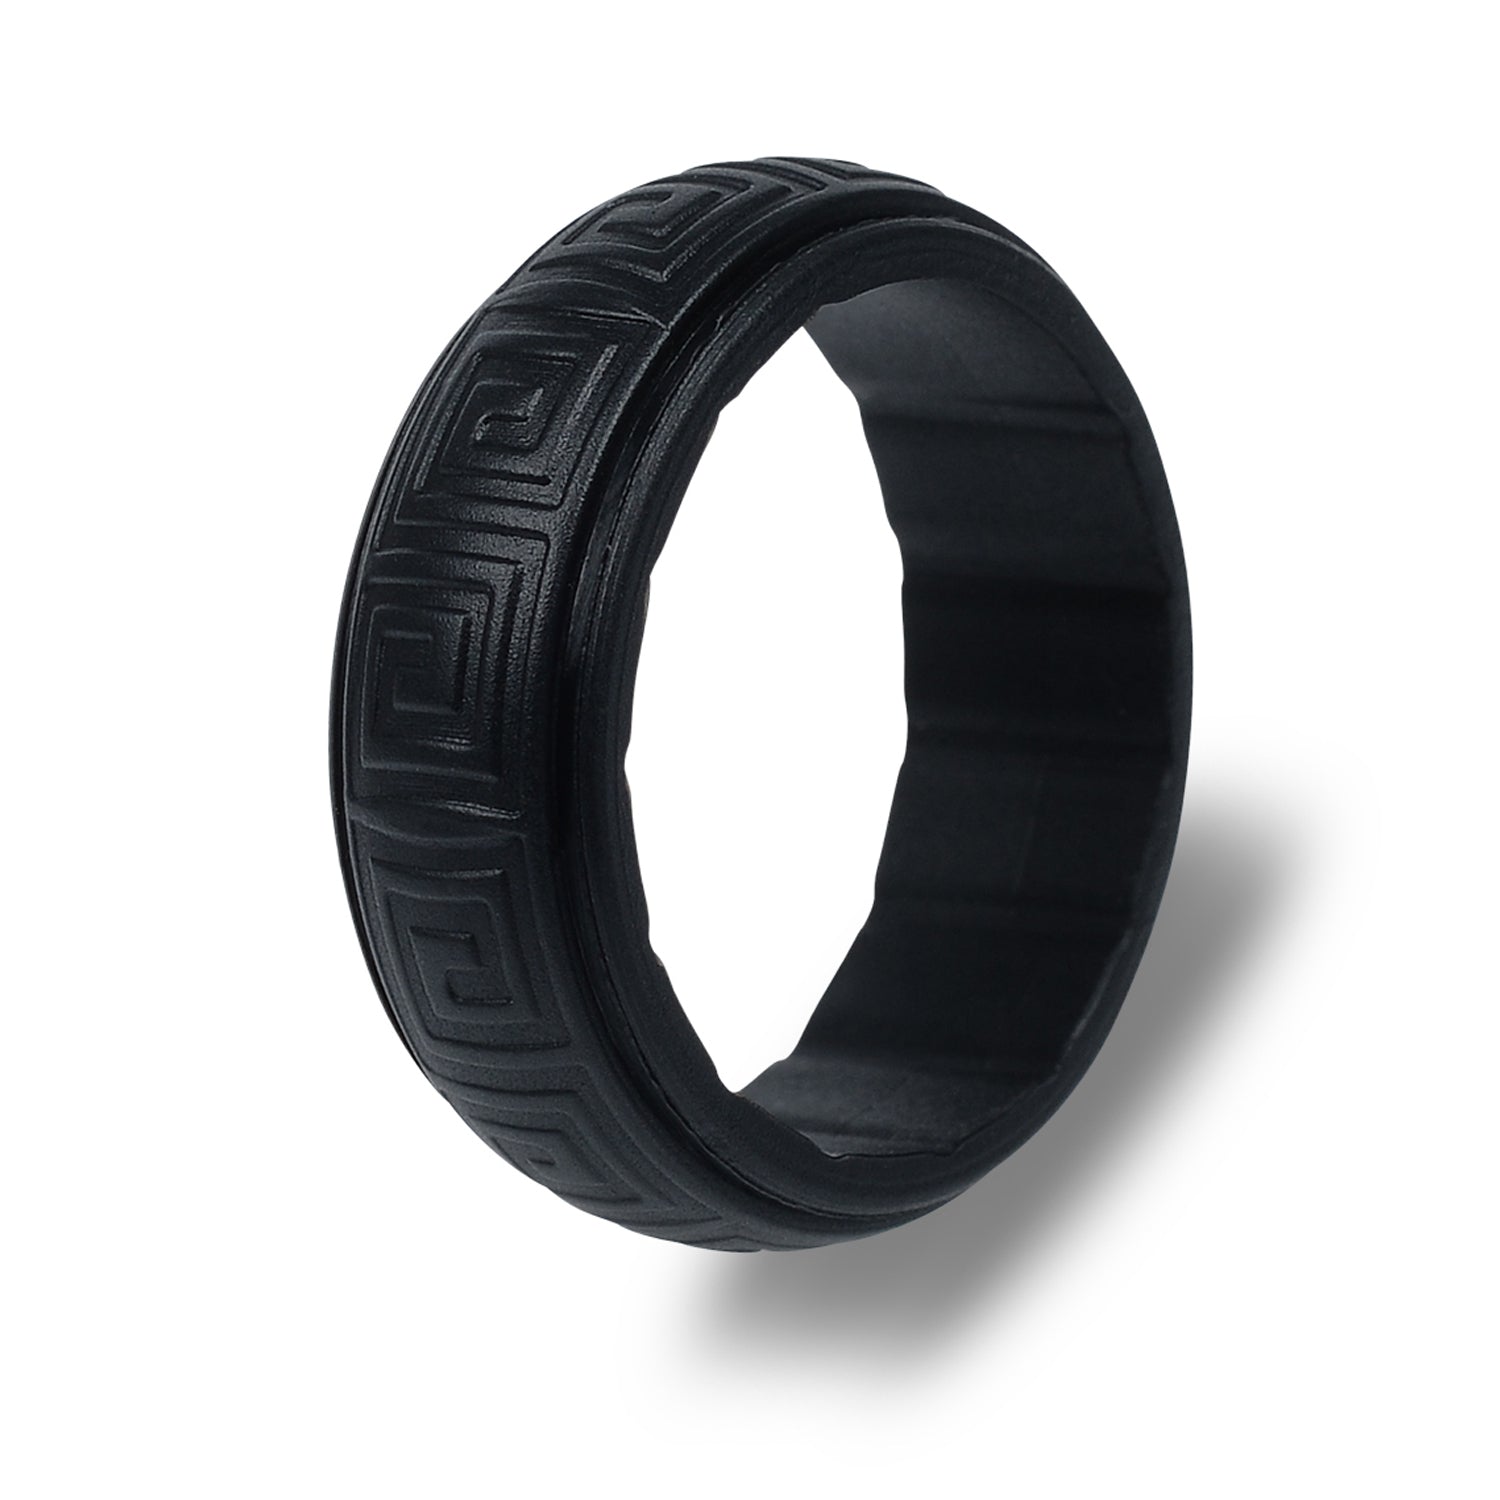 The Zeus - Silicone Ring